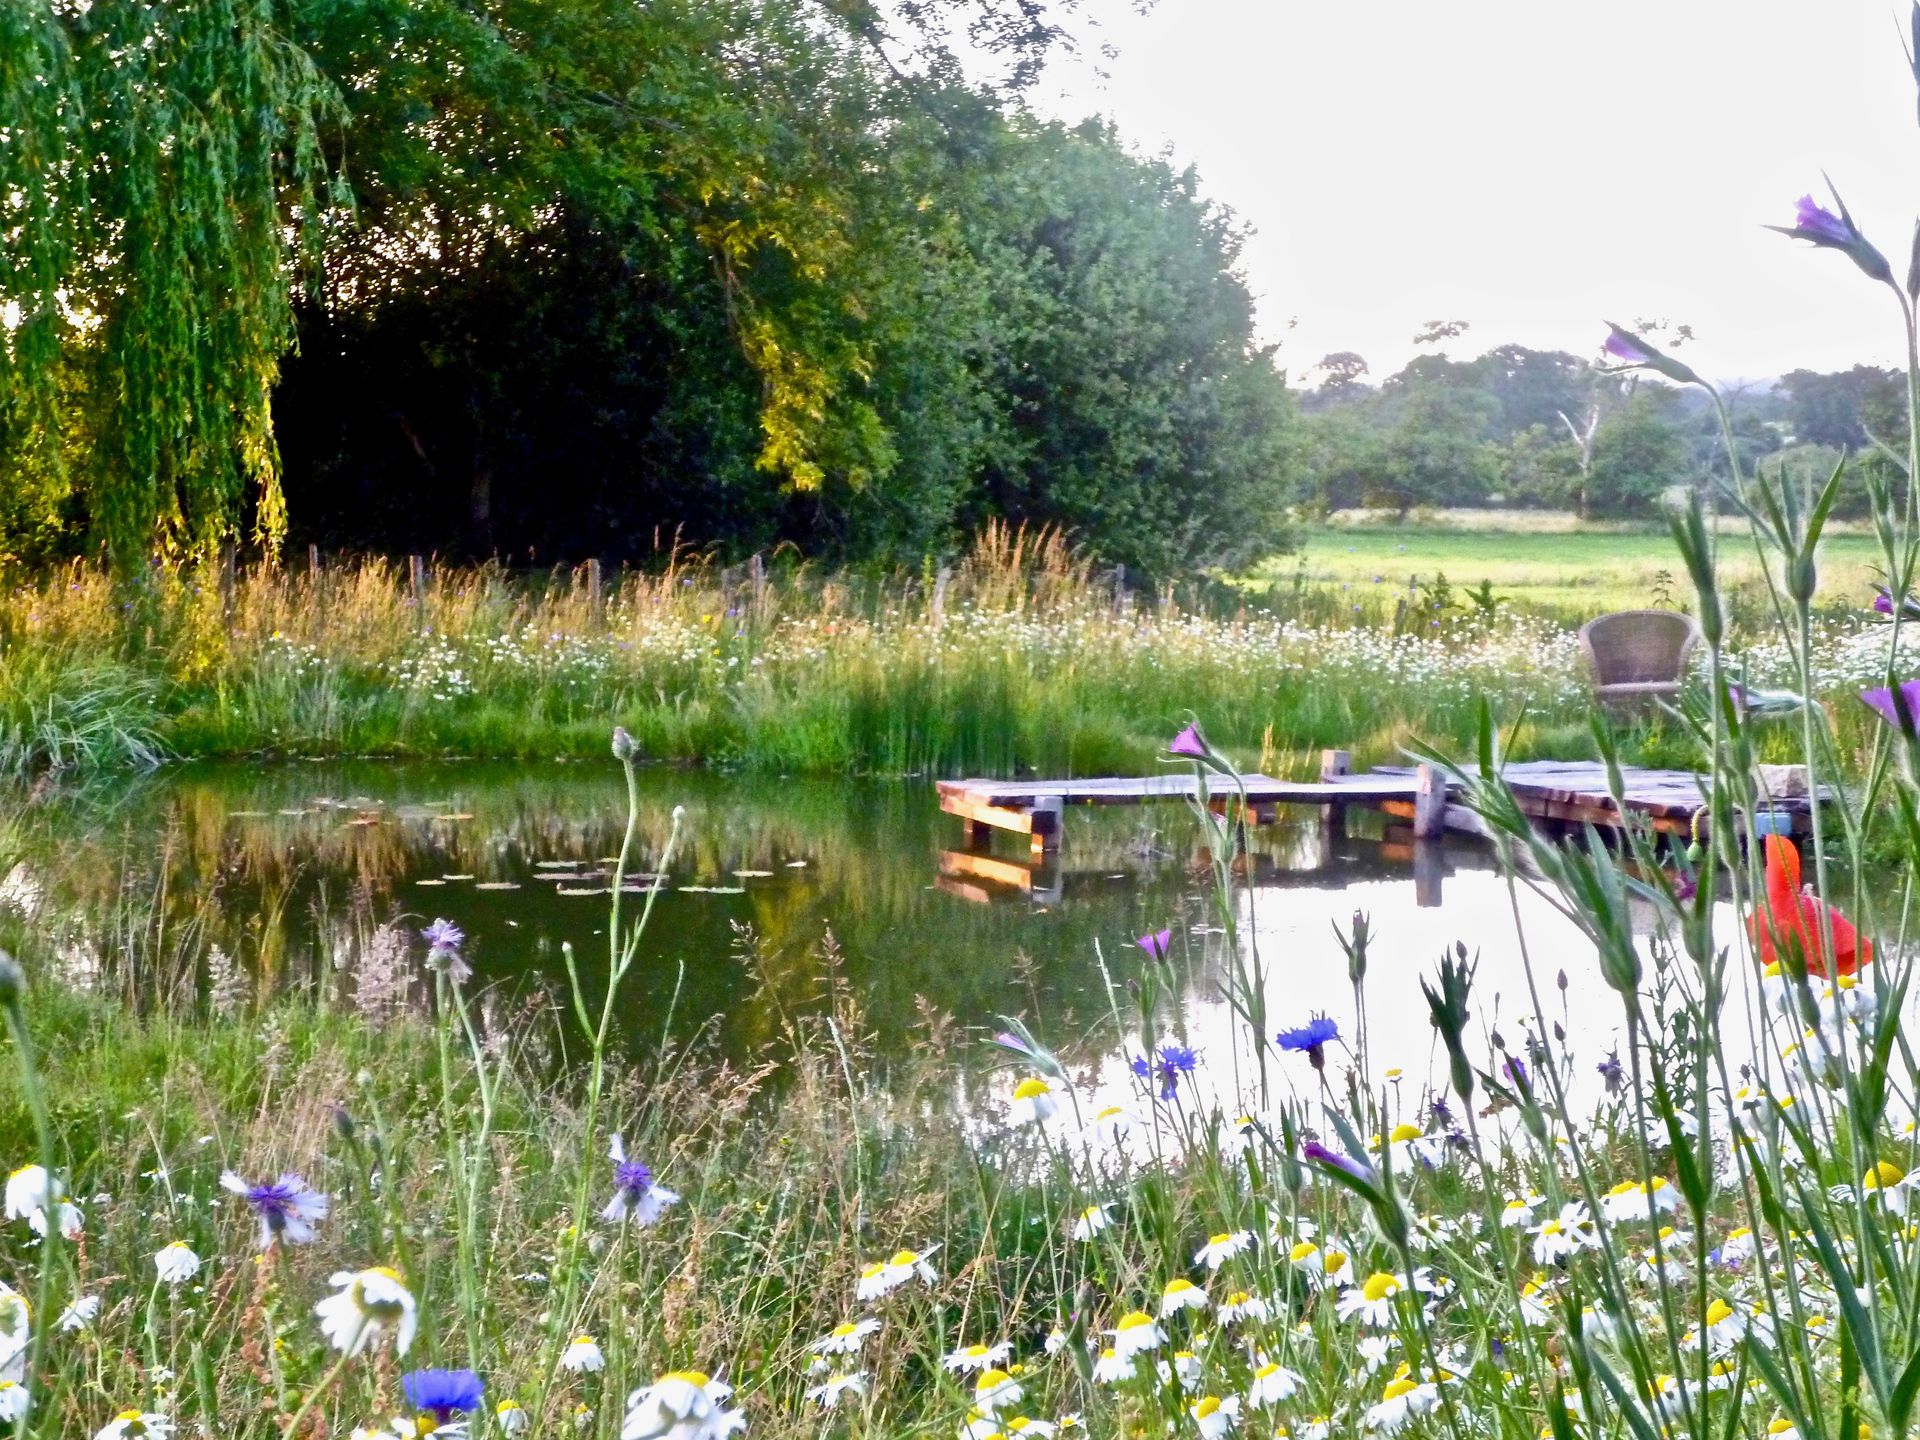 <p>                     Do your bit for wildlife gardens and create your new go-to spot, by building a pond. A magnet for birds, insects and mammals too, it’s amazing how quickly it will transform a featureless plot.                   </p>                                      <p>                     Designer Claudia de Yong has worked on a few ponds in her time and shares the following tips. 'The minute you introduce a water feature into a garden, whatever size, whatever style, you are immediately creating other dimensions. Water gently flowing over rocks and stone creates a soft, calming sound. Reflections of tree, plants and even buildings will as depth to your garden.'                   </p>                                      <p>                     Make the most of the site, by going for the biggest garden ponds you can – they always look smaller once they are full and planting has established. Native wildflowers and grasses will soften the edges and provide cover for wildlife, while a simple timber jetty is the perfect place to sit and gaze from.                   </p>